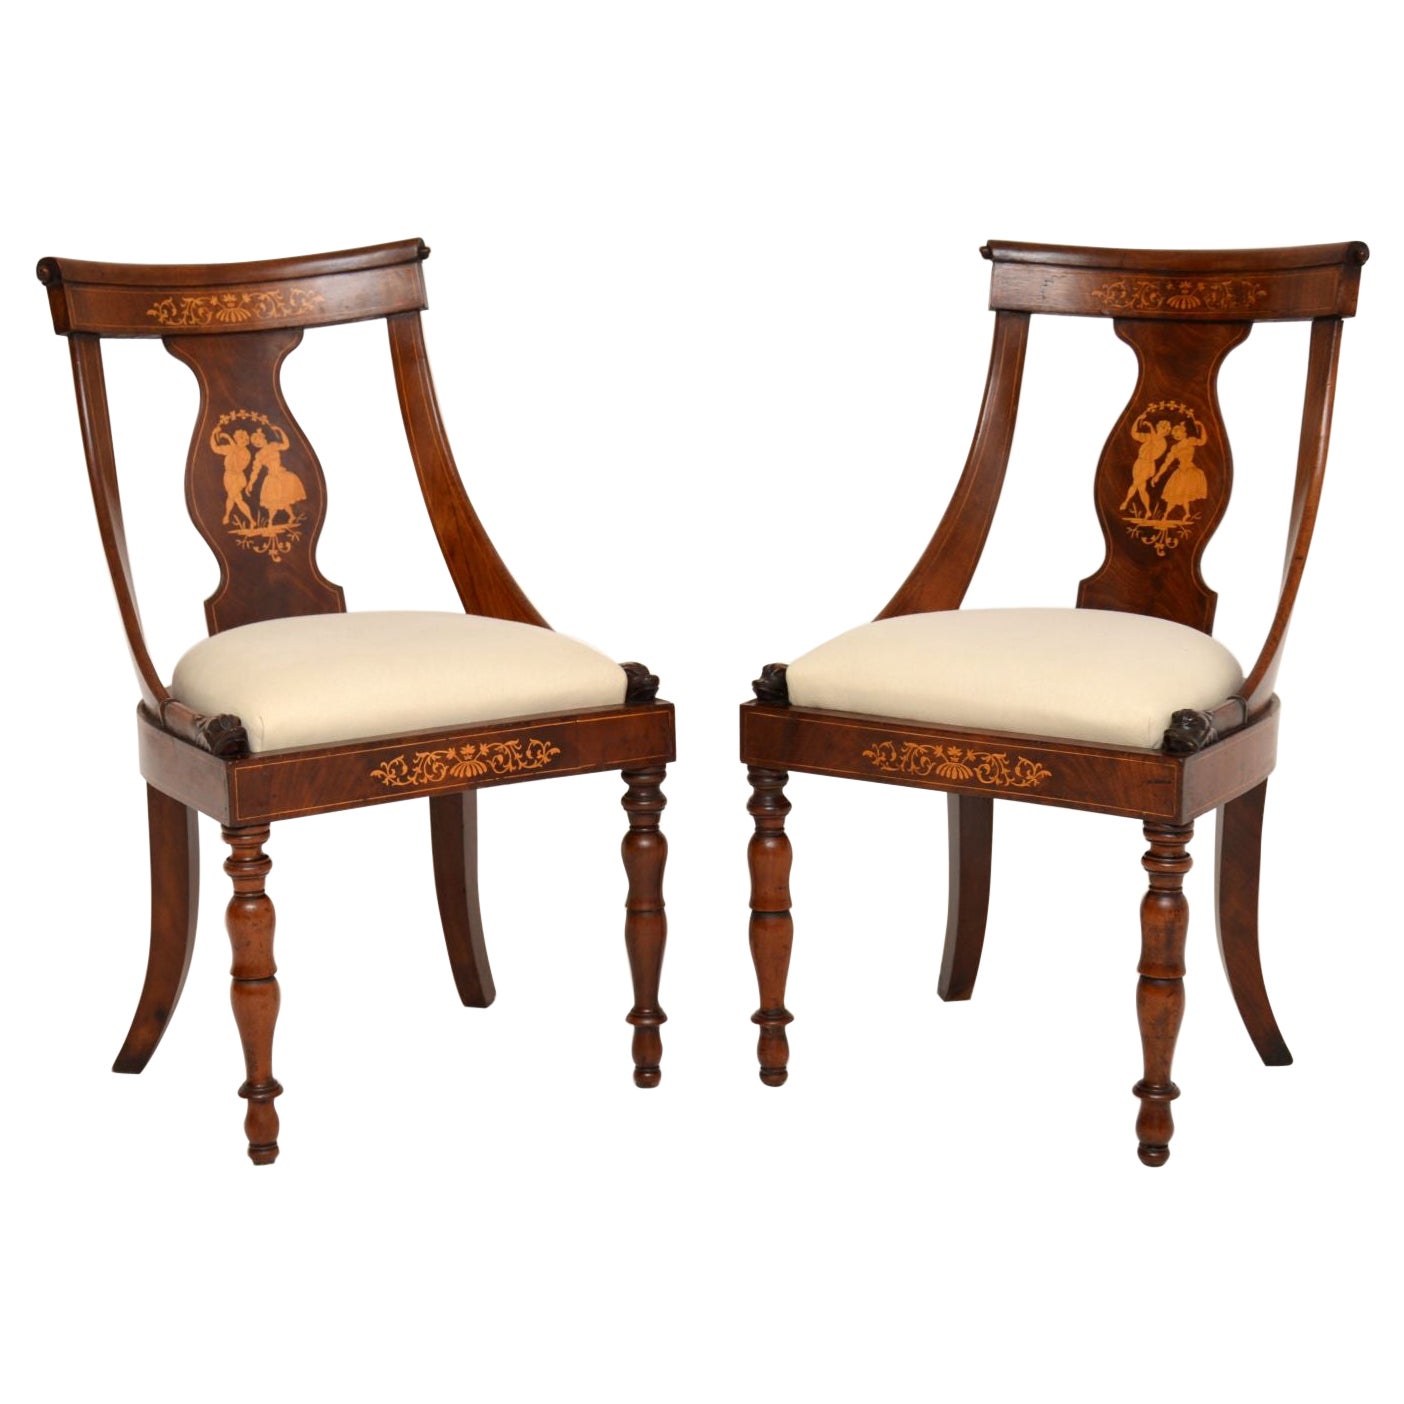 Pair of Antique Inlaid Neo Classical Side Chairs